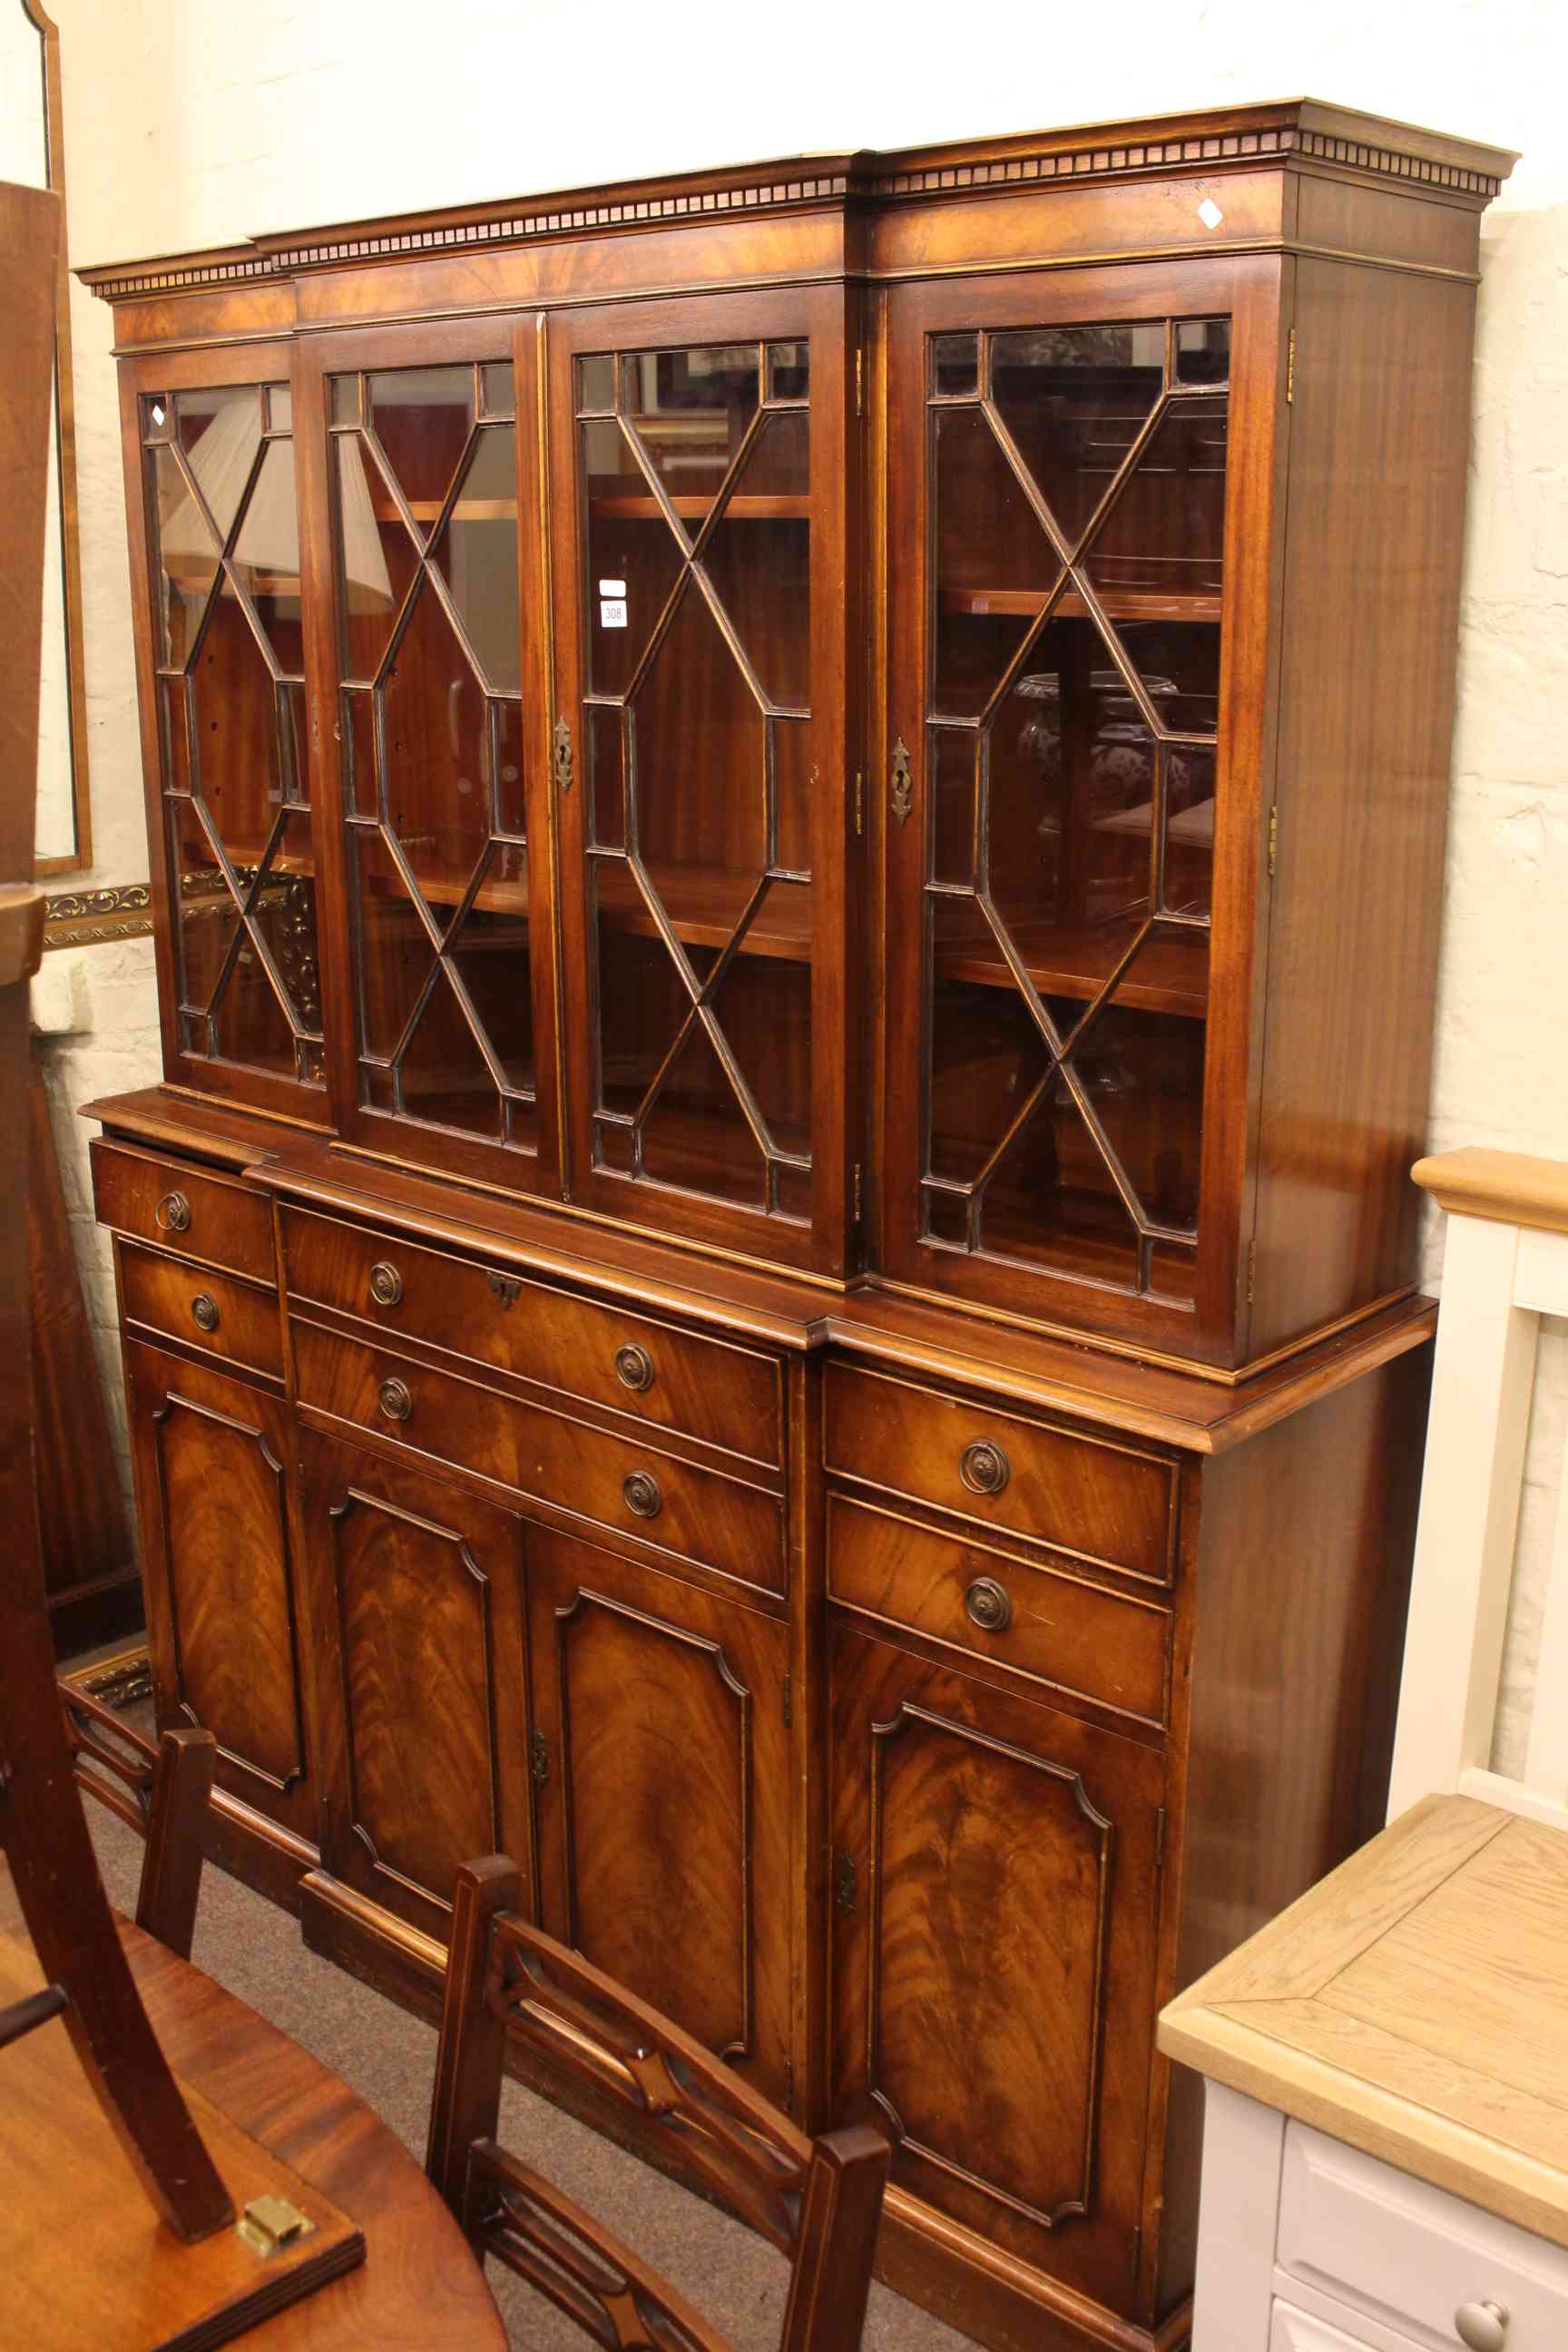 Bevan Funnell Reprodux mahogany breakfront secretaire bookcase, - Image 2 of 3